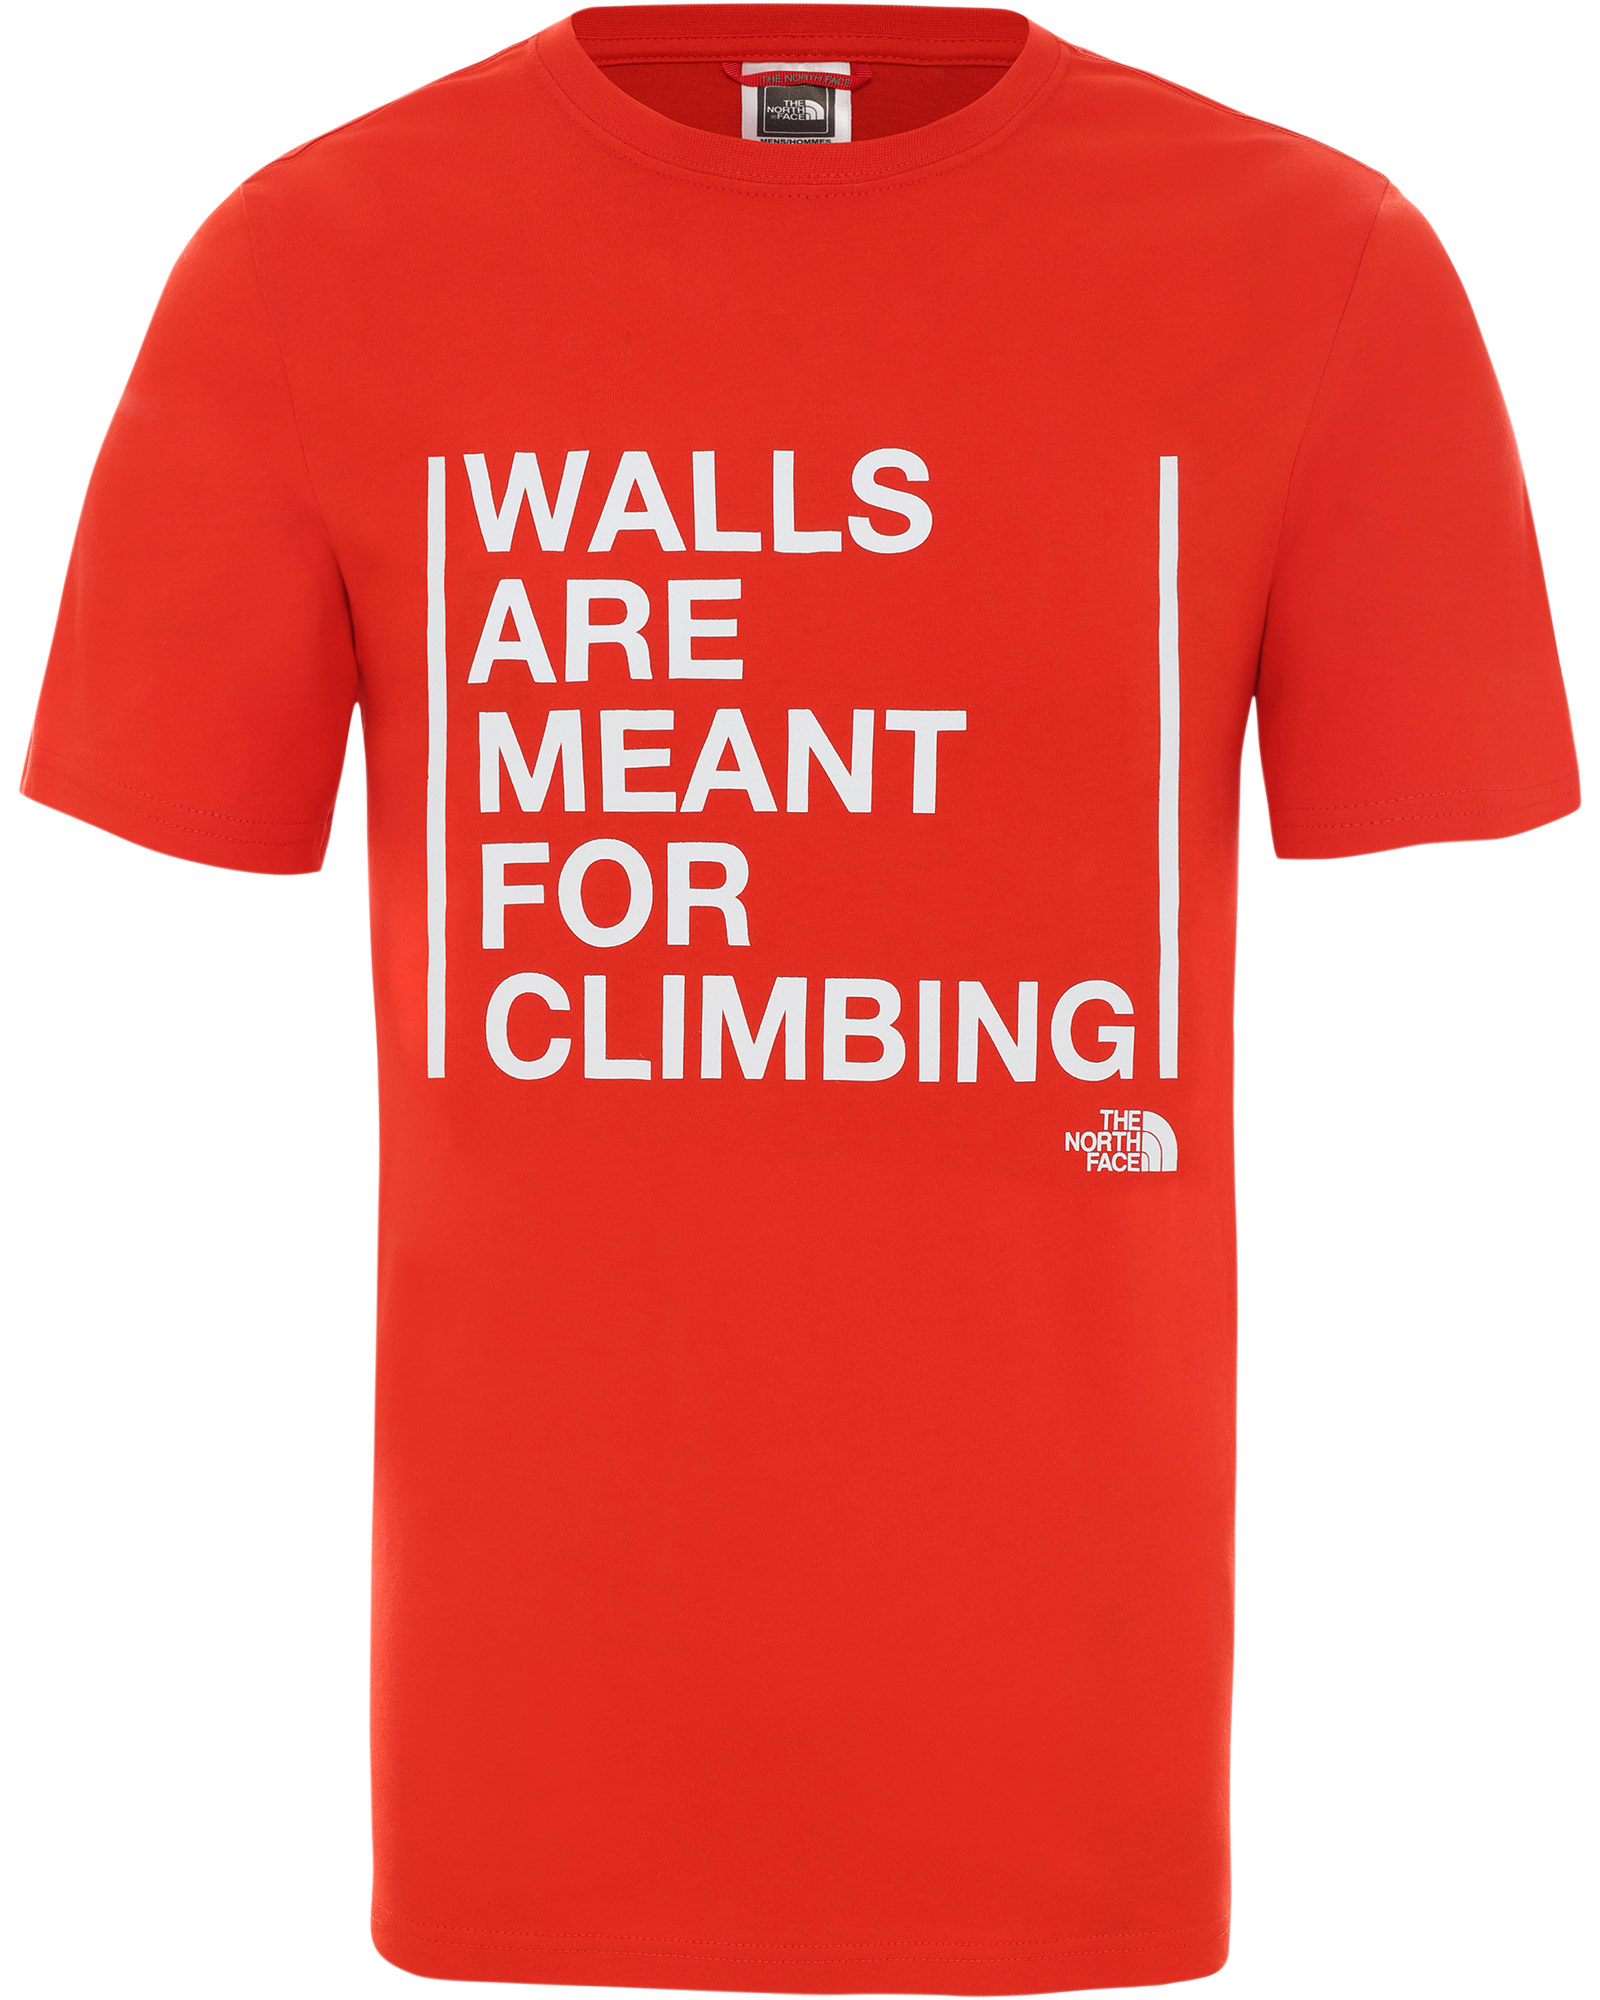 The North Face Walls Are For Climbing Men’s T Shirt - Fiery Red S